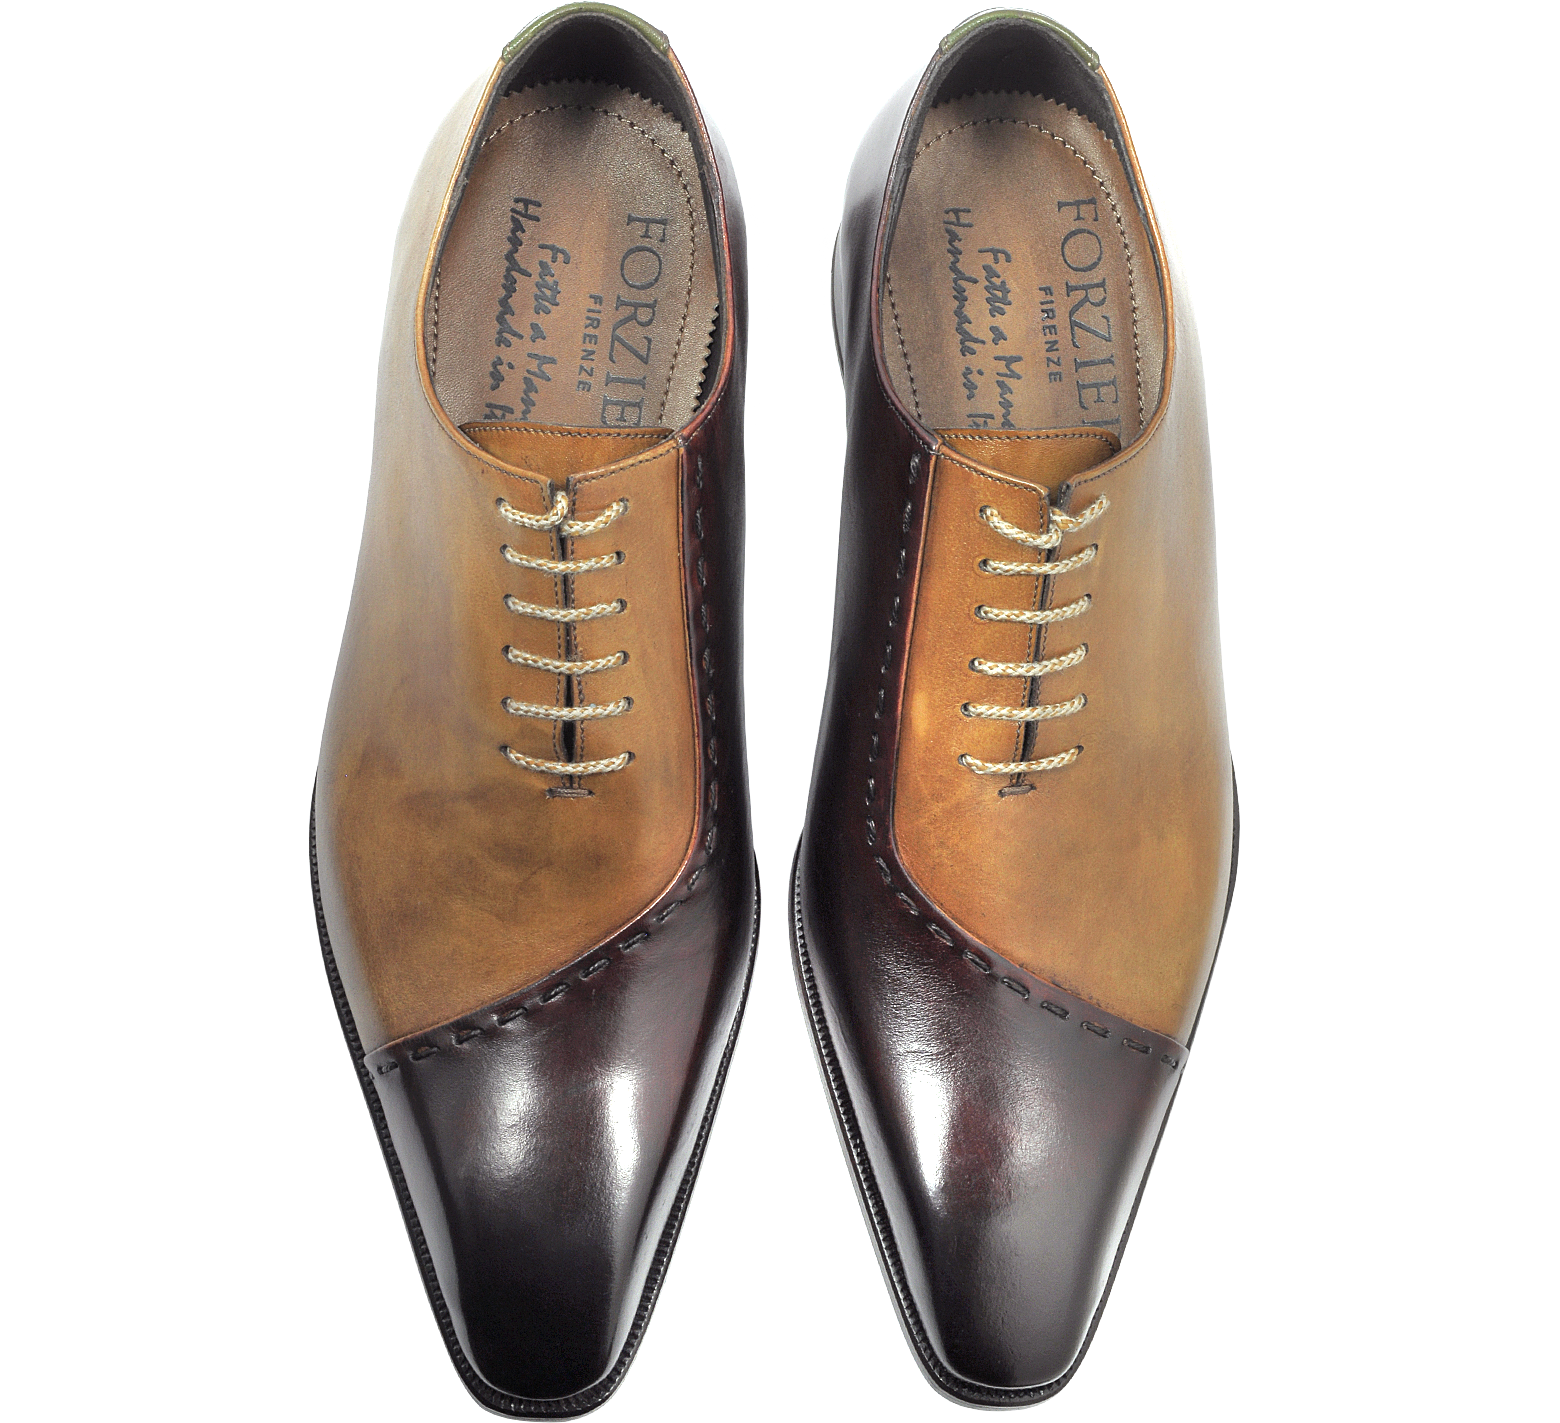 Forzieri Brown Italian Handcrafted Leather Cap Toe Dress Shoes 6 US   UK | 40 EU at FORZIERI